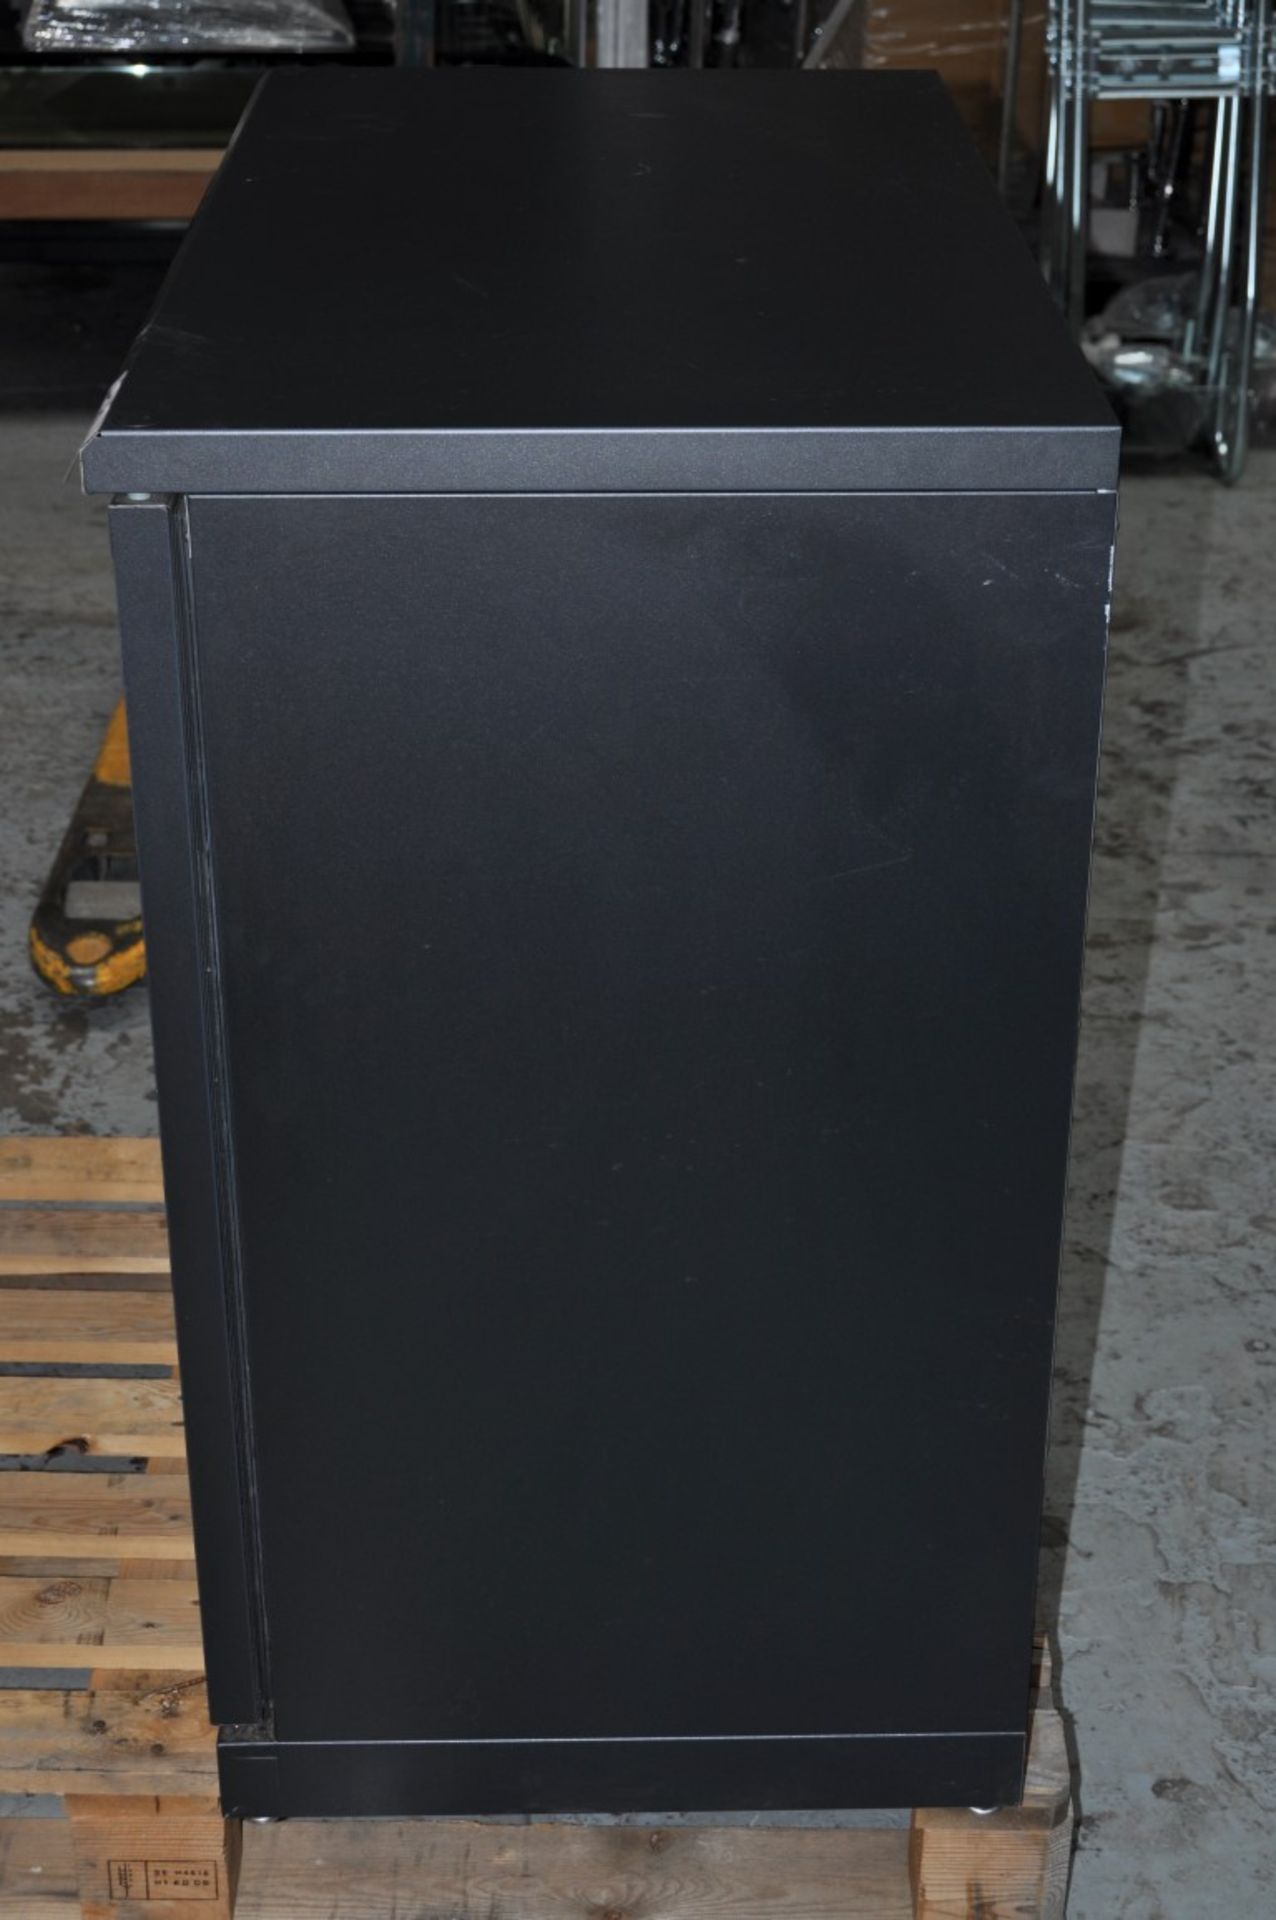 1 x Gamko Two Door Bottle Cooler With Internal Shelves - Ideal For Pubs, Clubs or Restaurants - BEER - Image 7 of 8